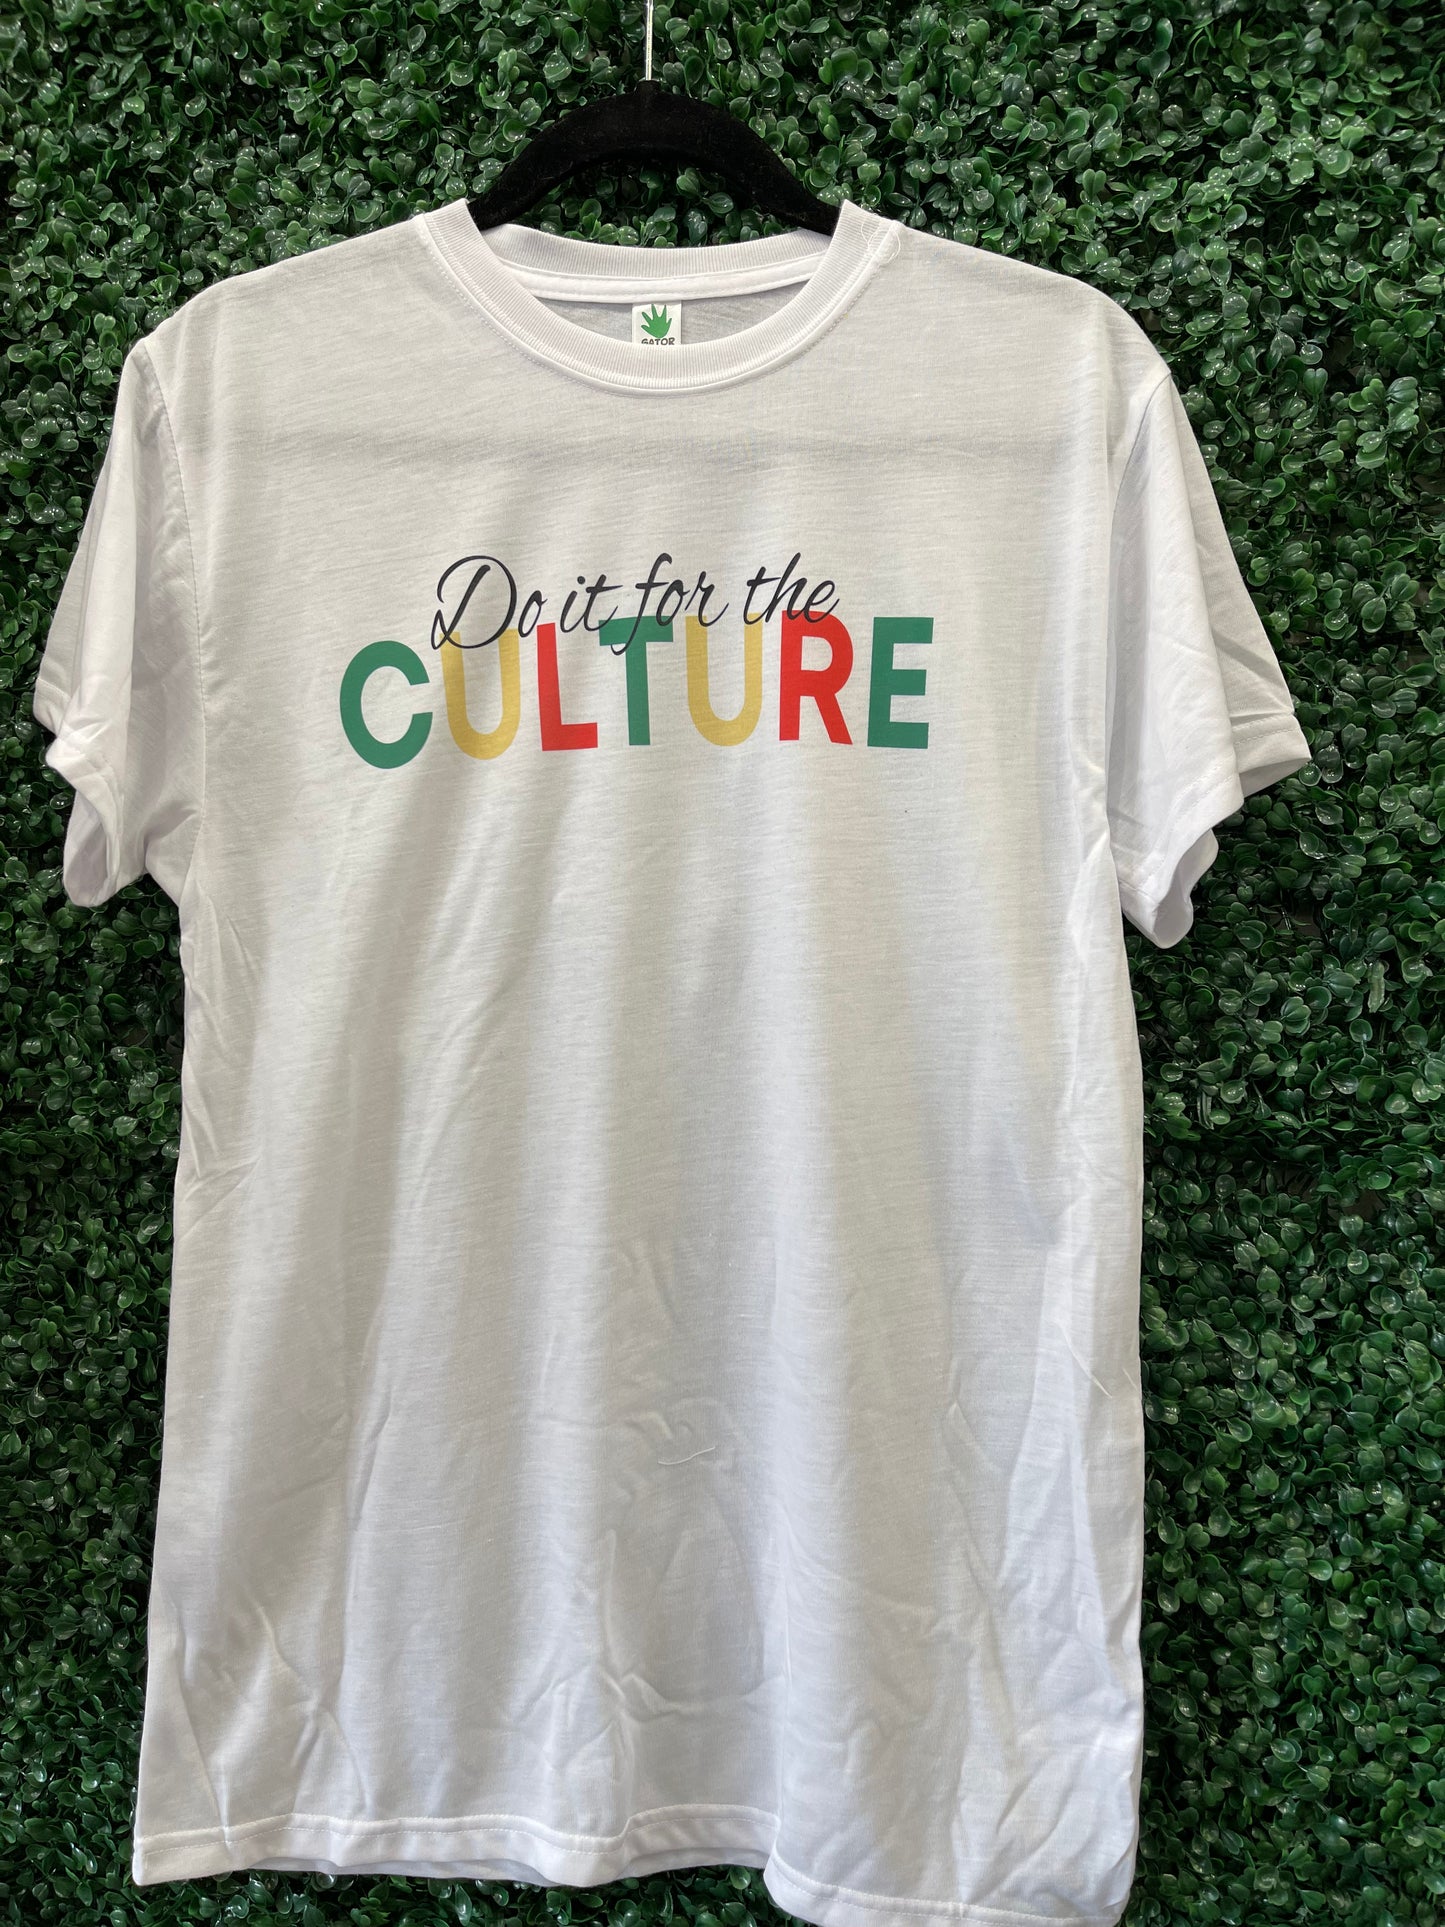 Do it for the Culture Tshirt